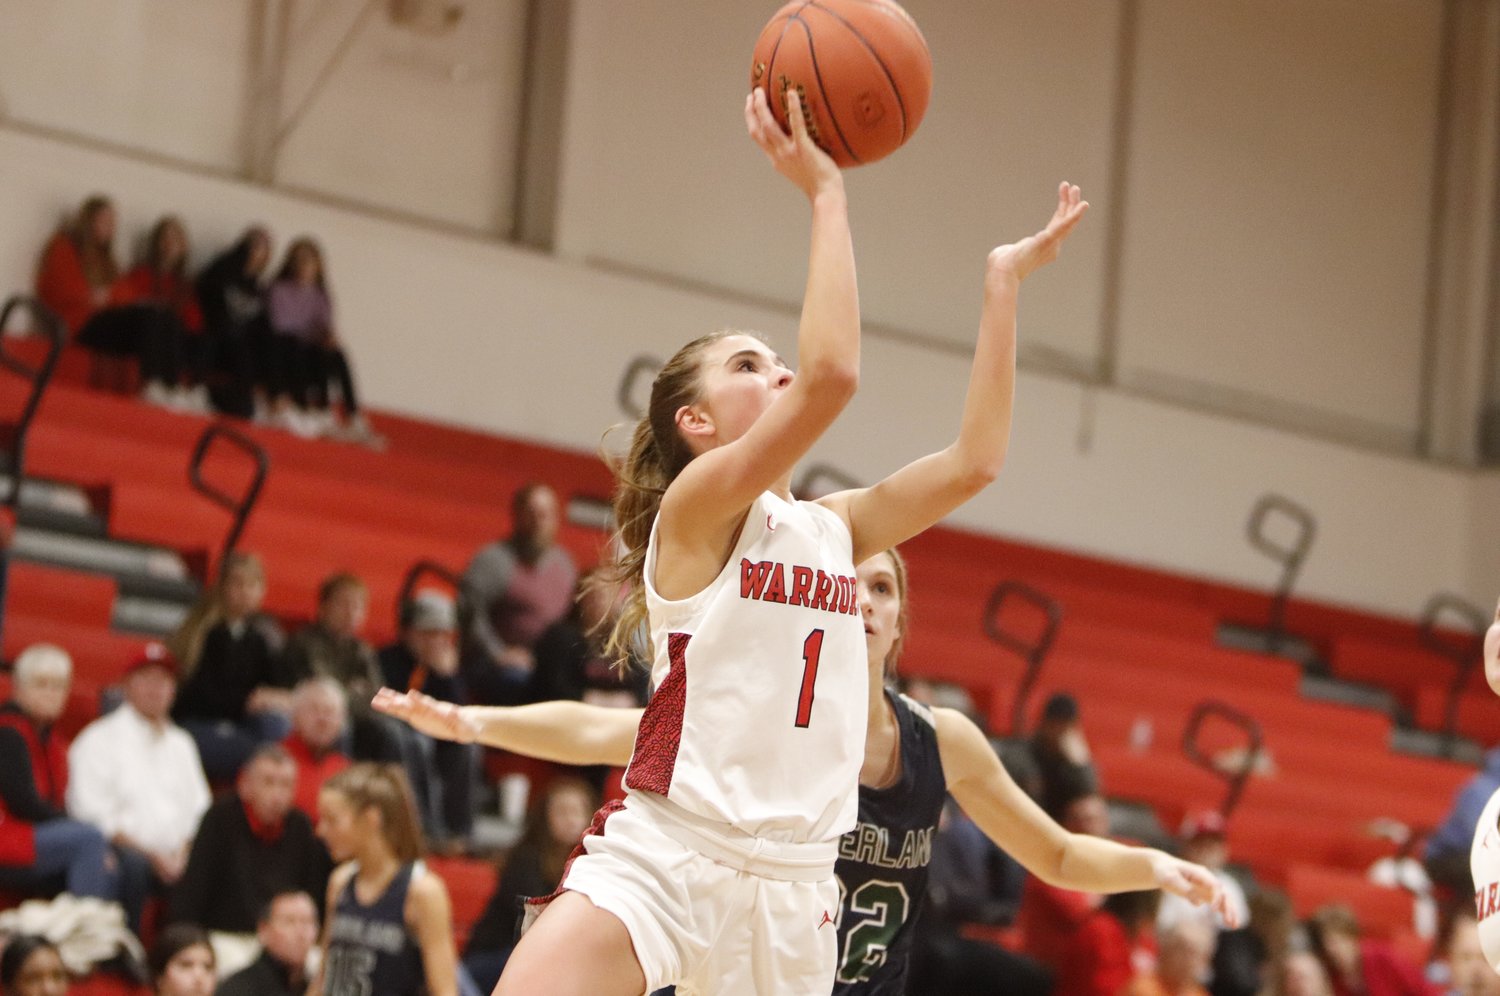 Isabel Benke scores two of her seven points in Friday’s loss to Timberland in the Warrenton Tournament championship game.